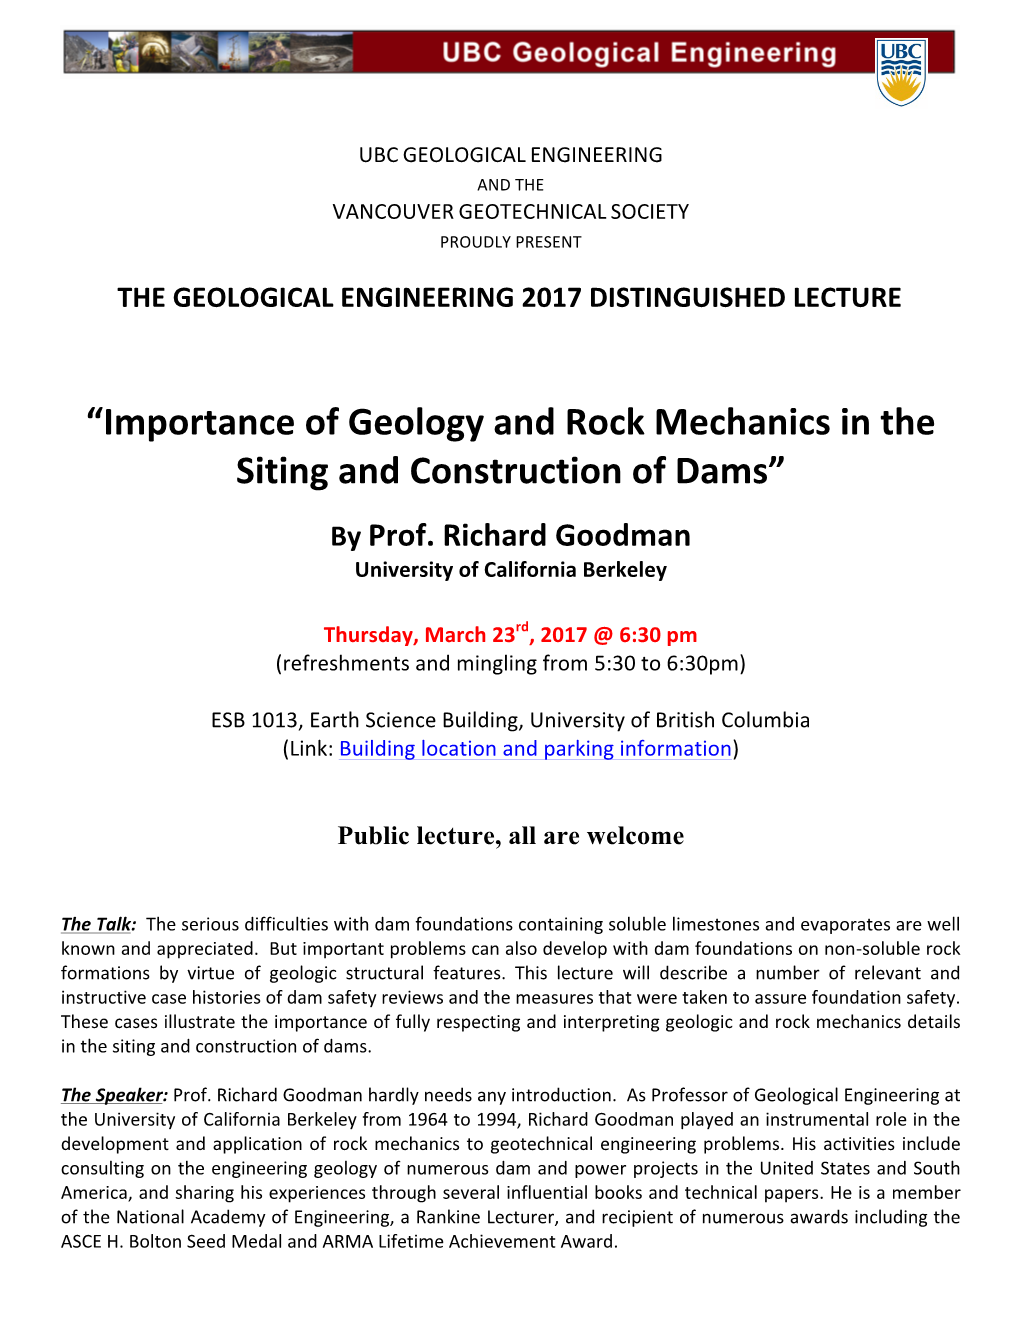 “Importance of Geology and Rock Mechanics in the Siting and Construction of Dams” by Prof